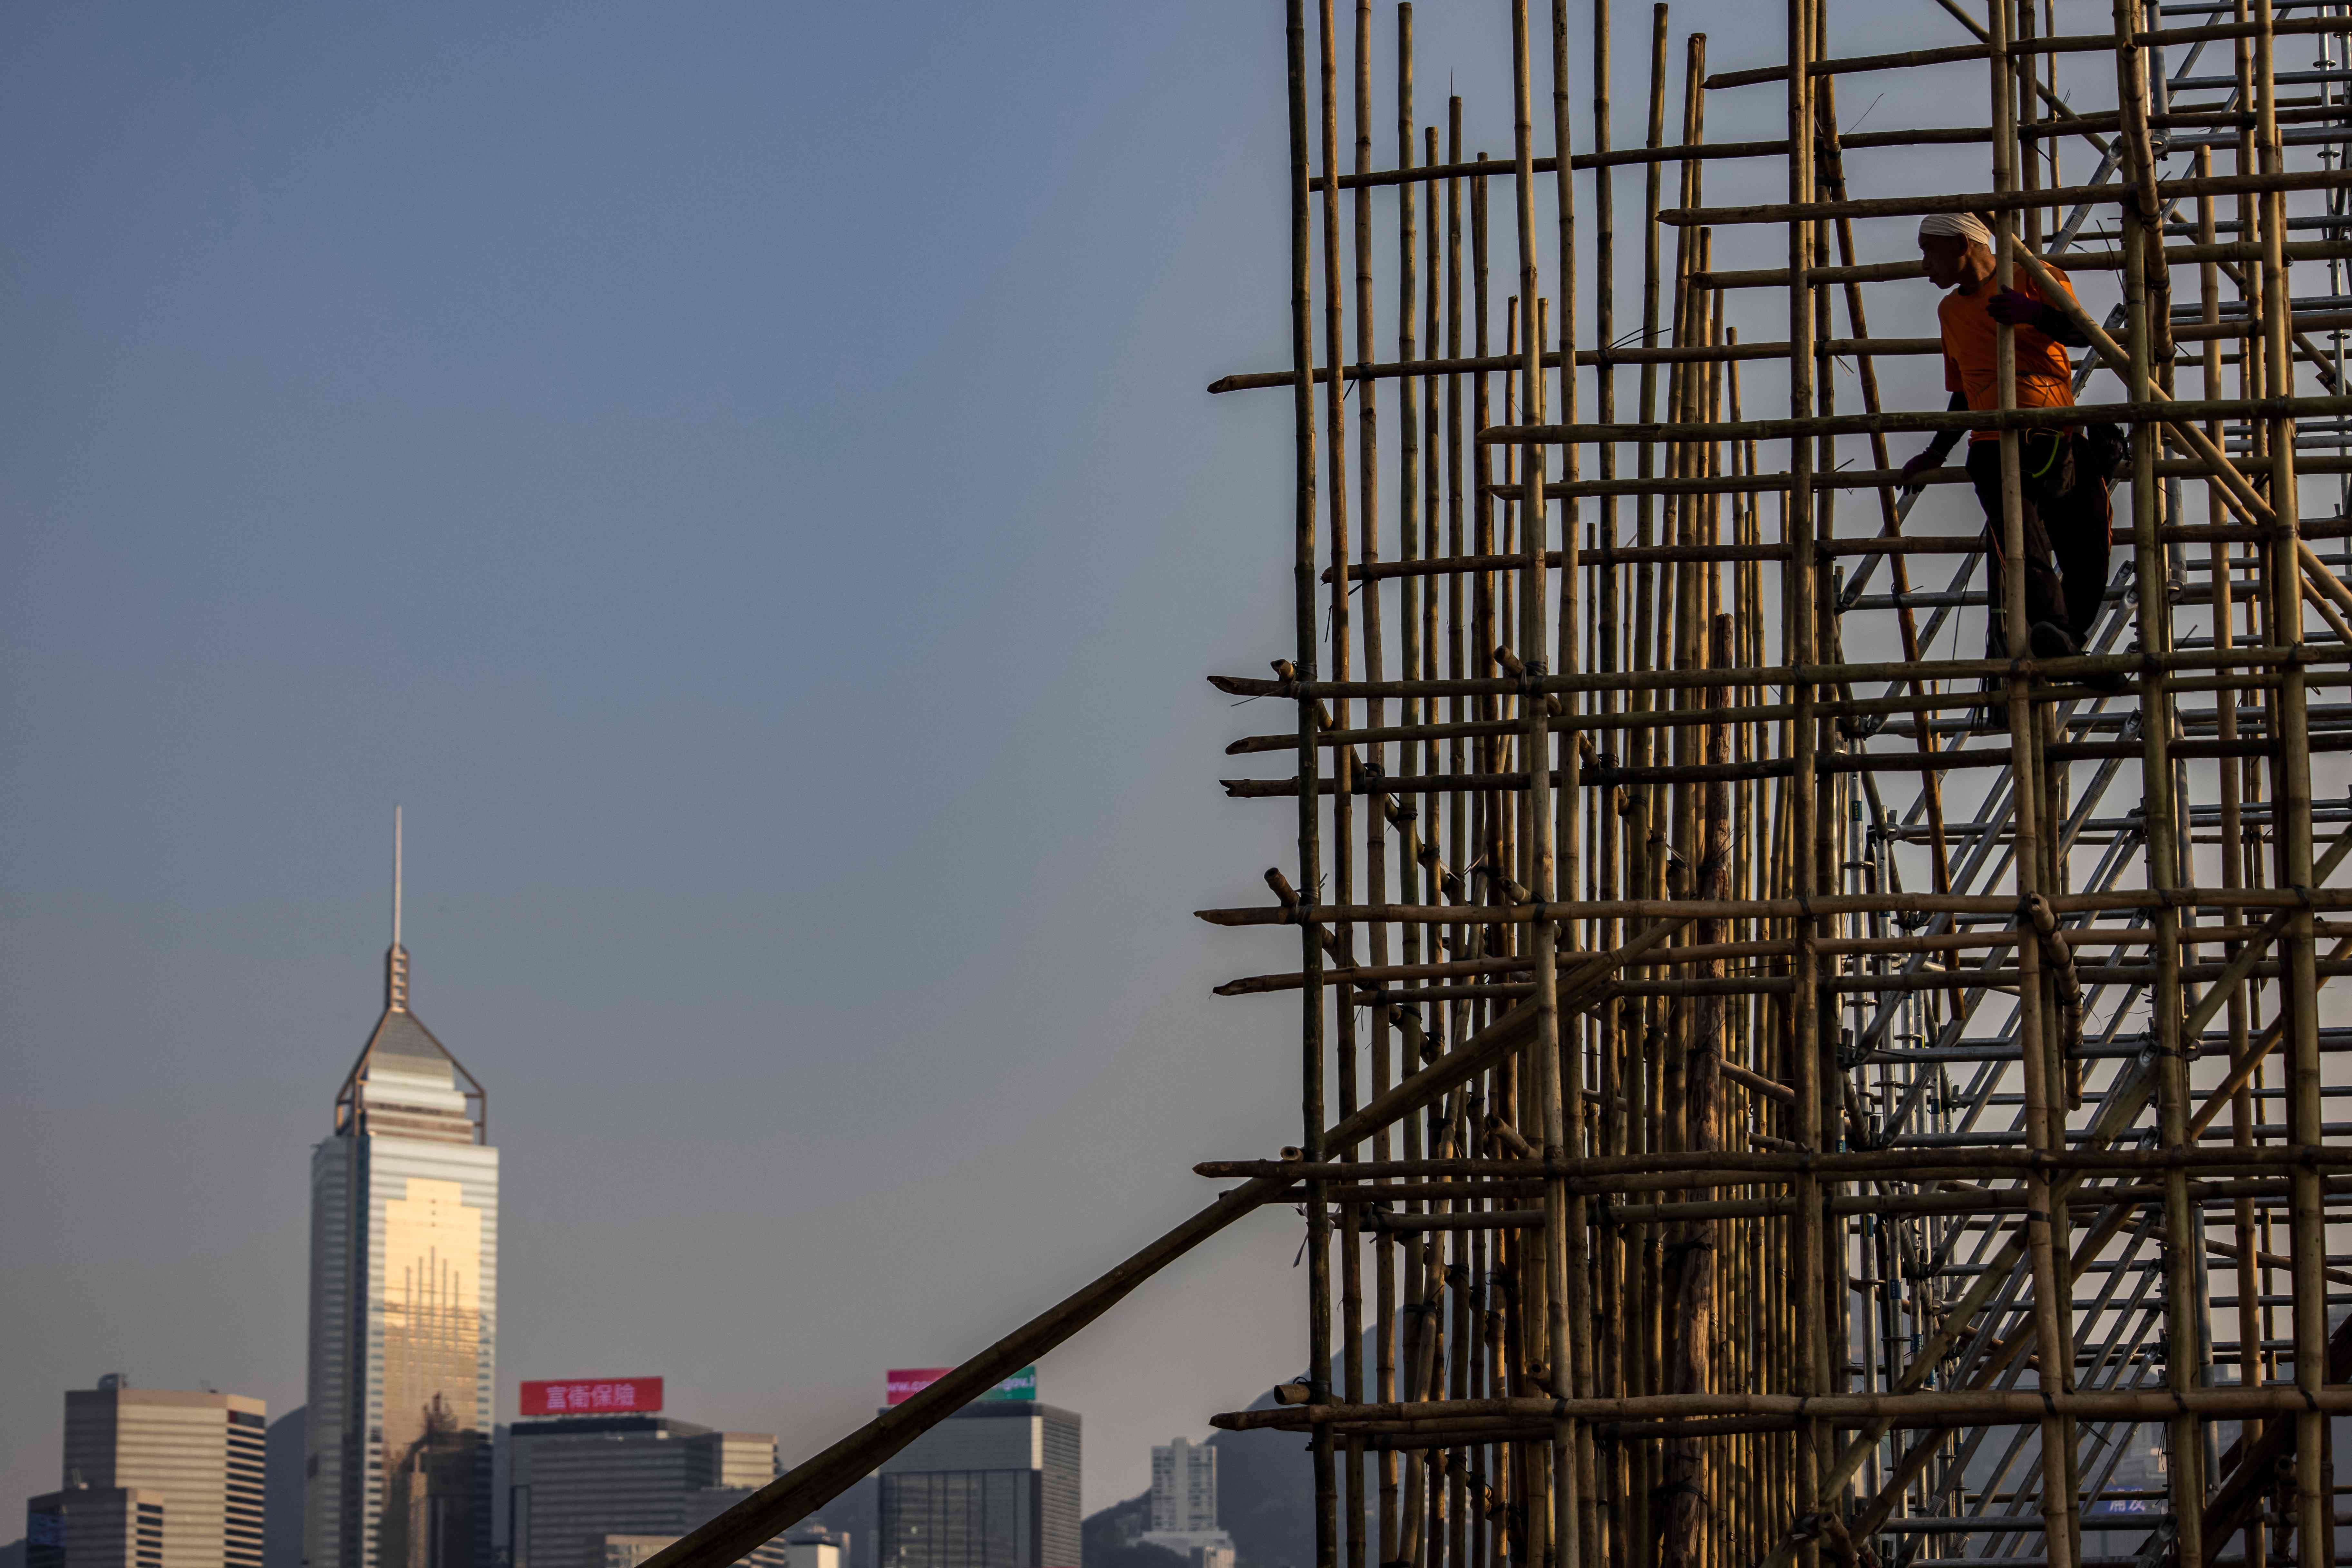 This picture taken on 1 March 2023 in Hong Kong, said to be the world’s most skyscraper-laden metropolis, shows a scaffolder standing on bamboo scaffolding